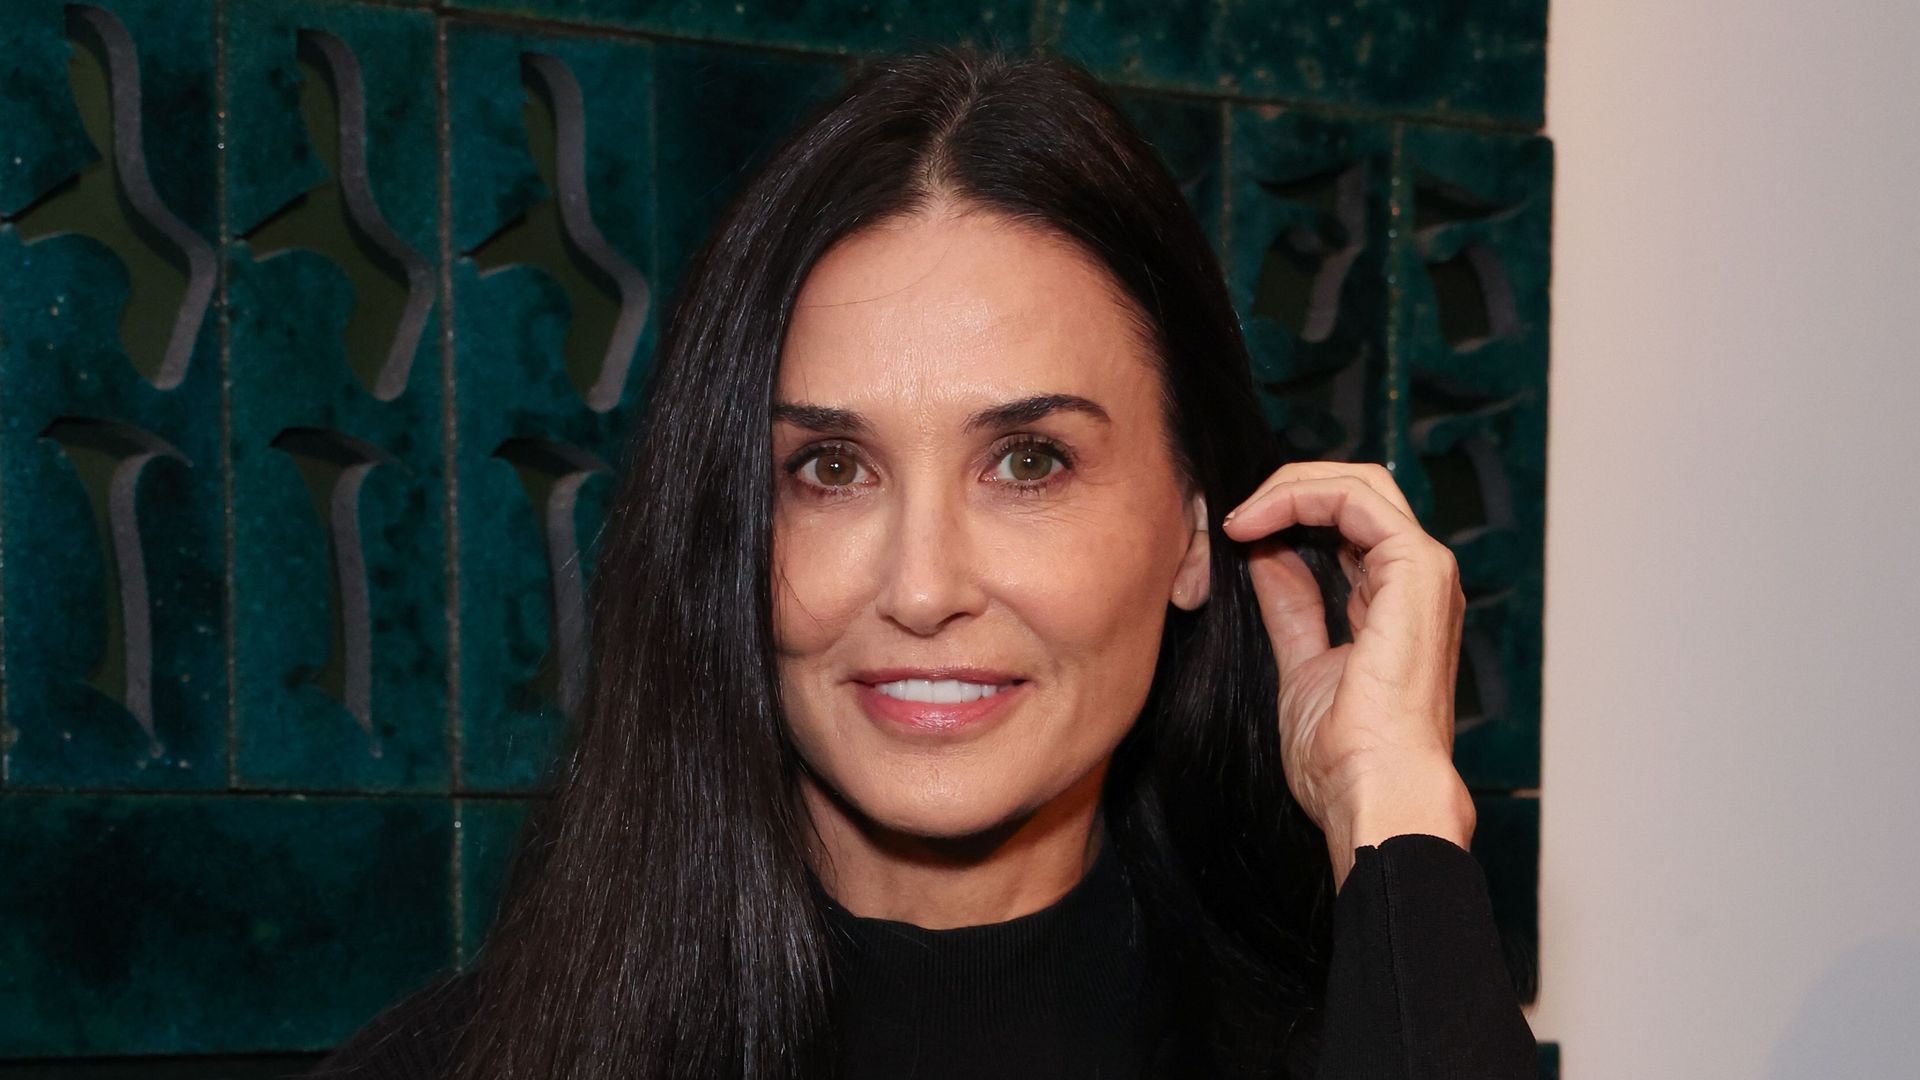 demi moore black dress frequency exhibition